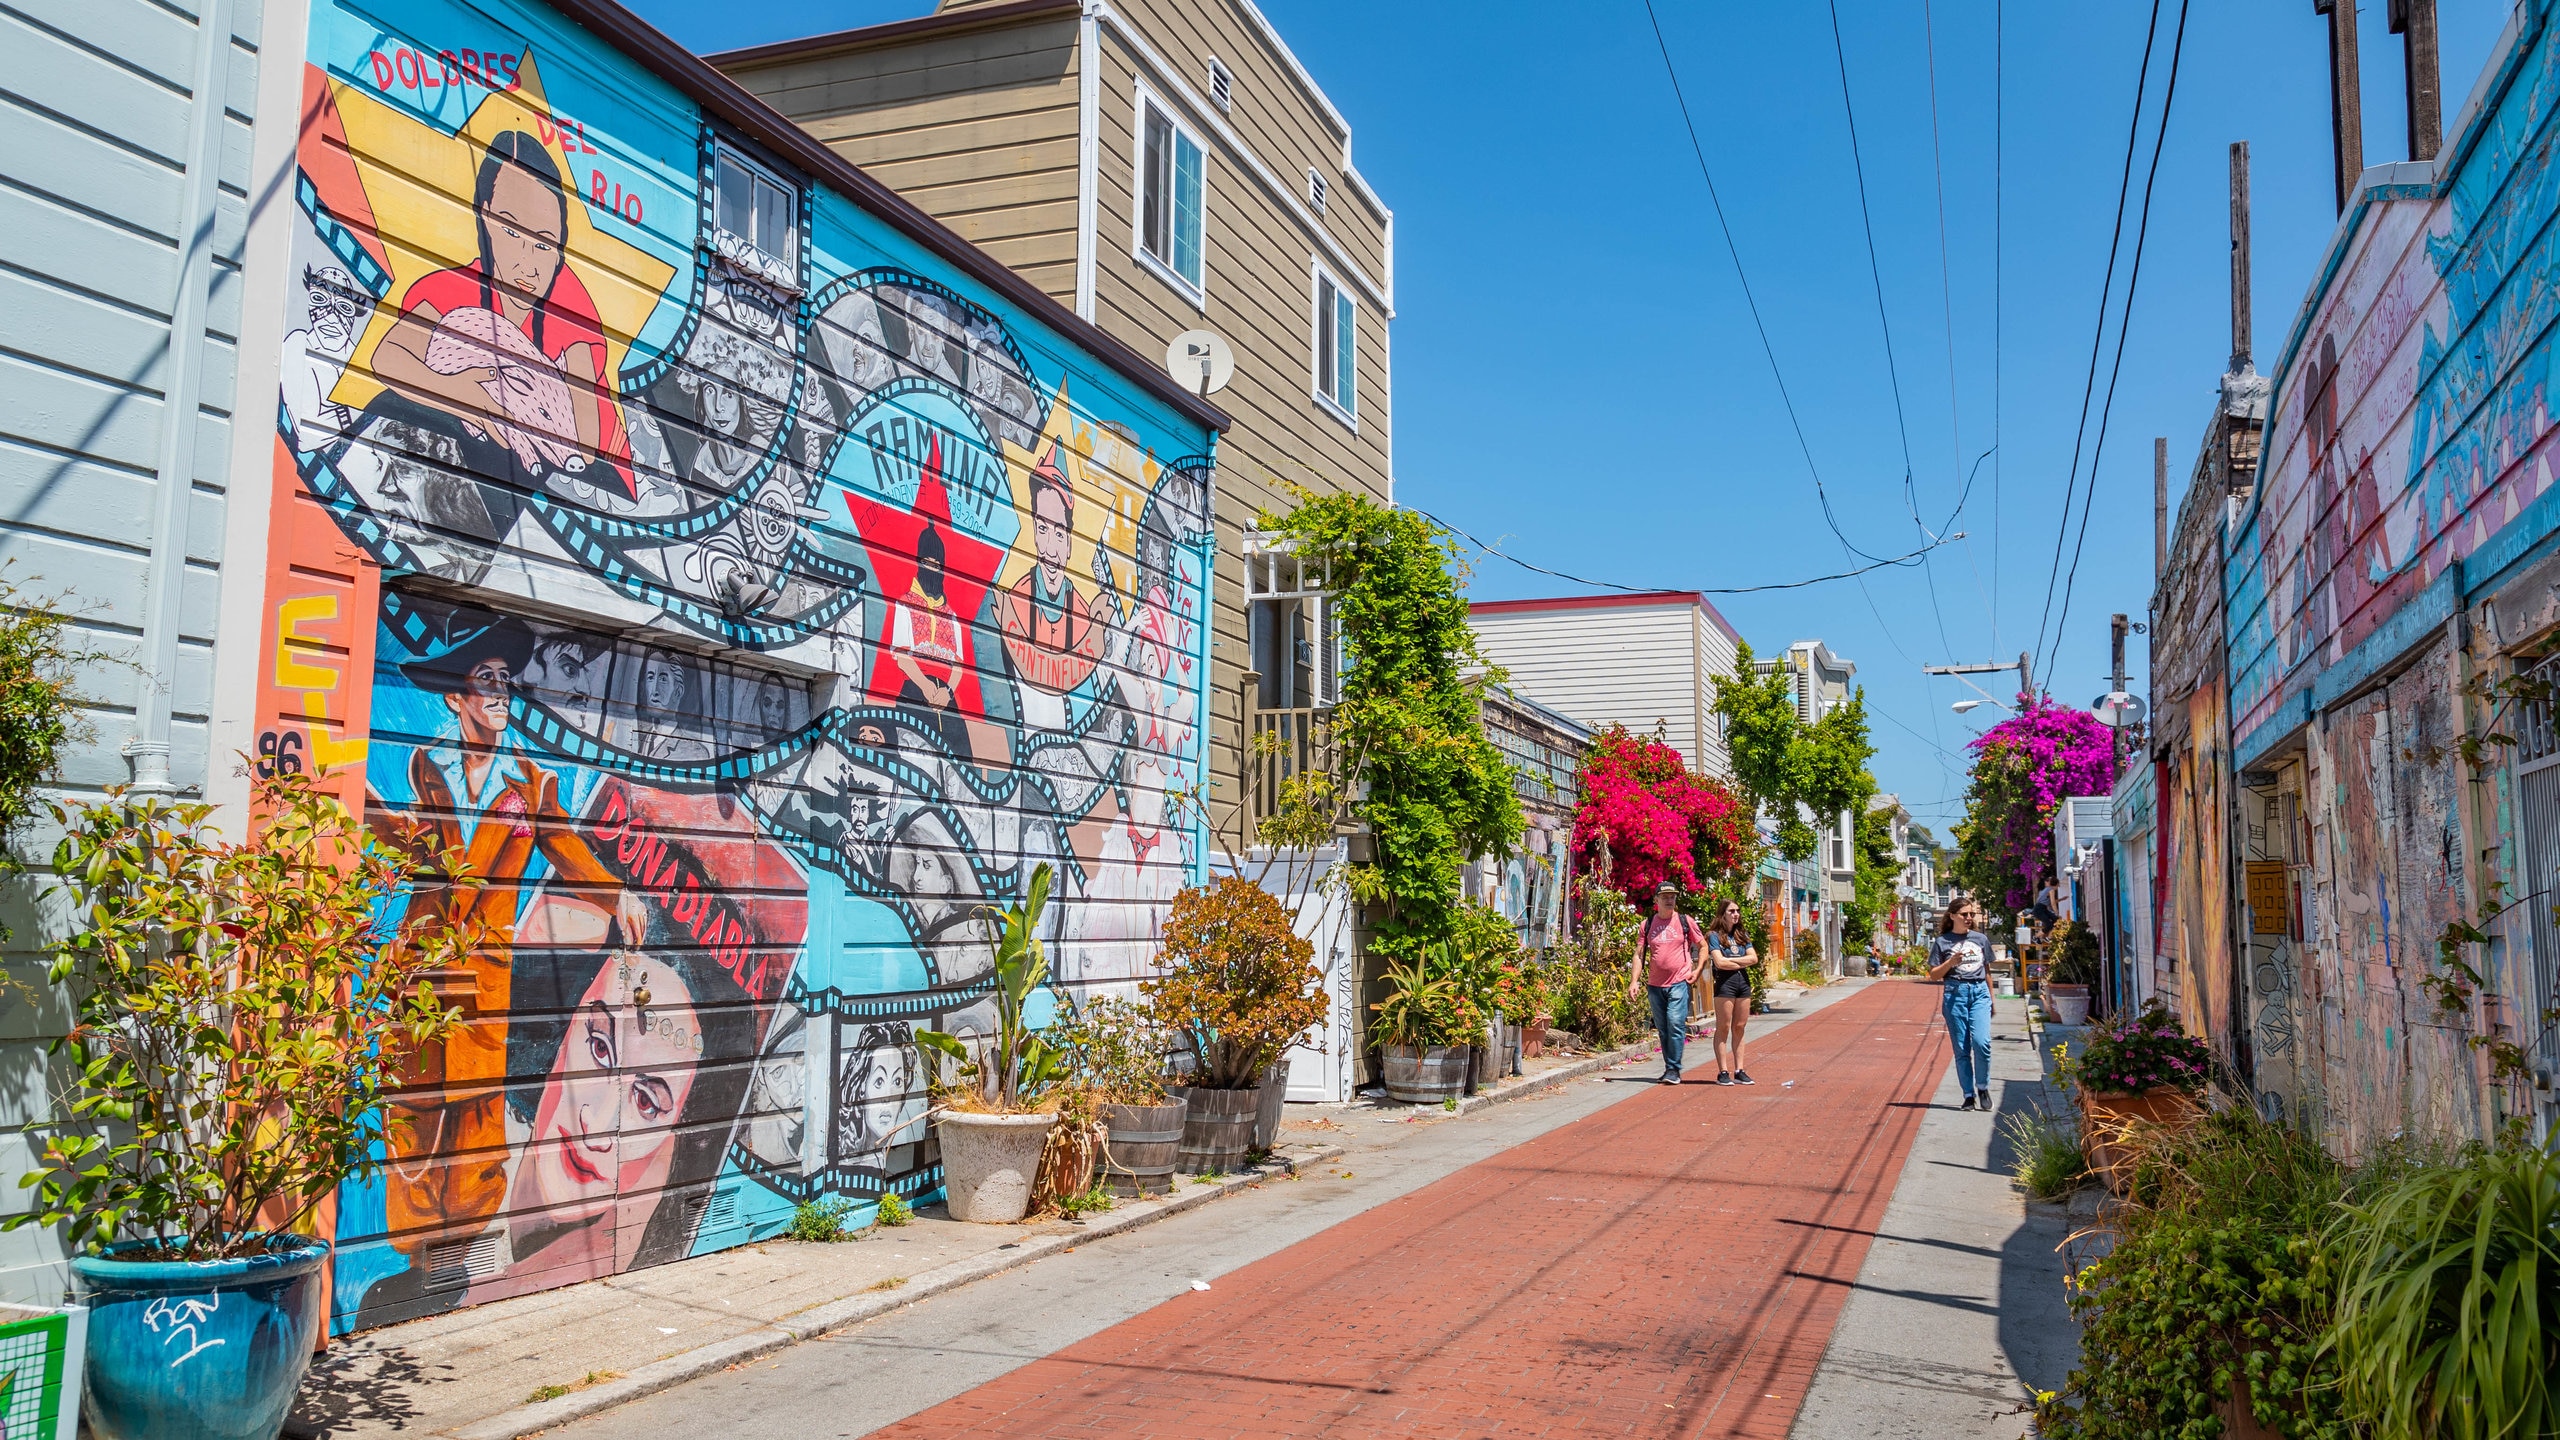 A colorful mural in the Mission District of San Francisco